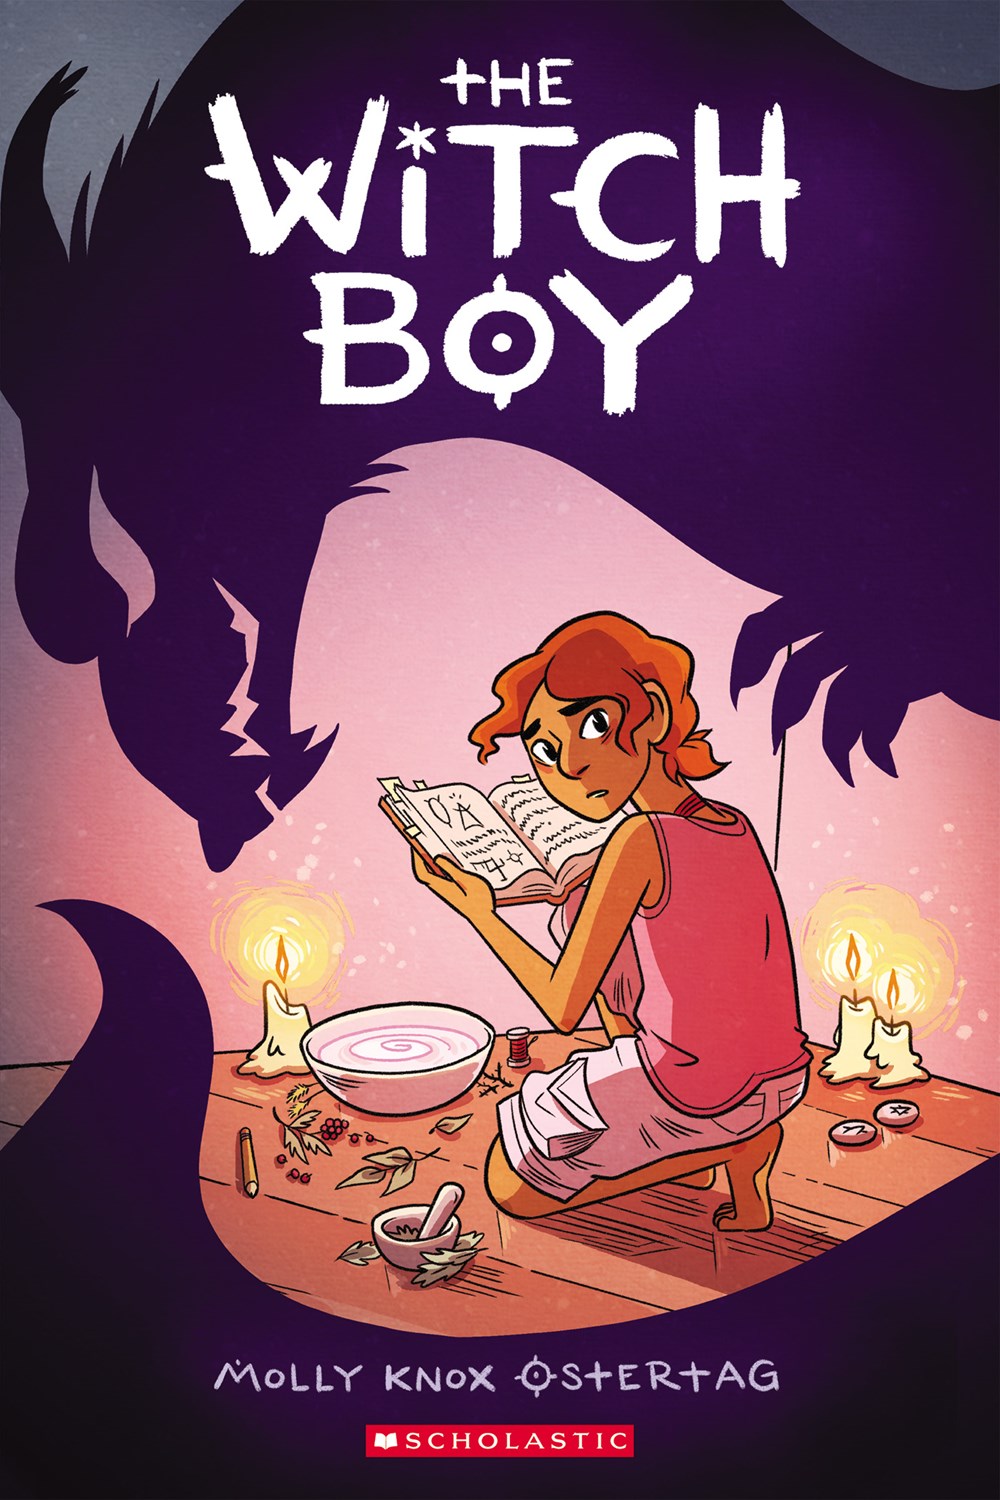 The Witch Boy Molly Knox Ostertag